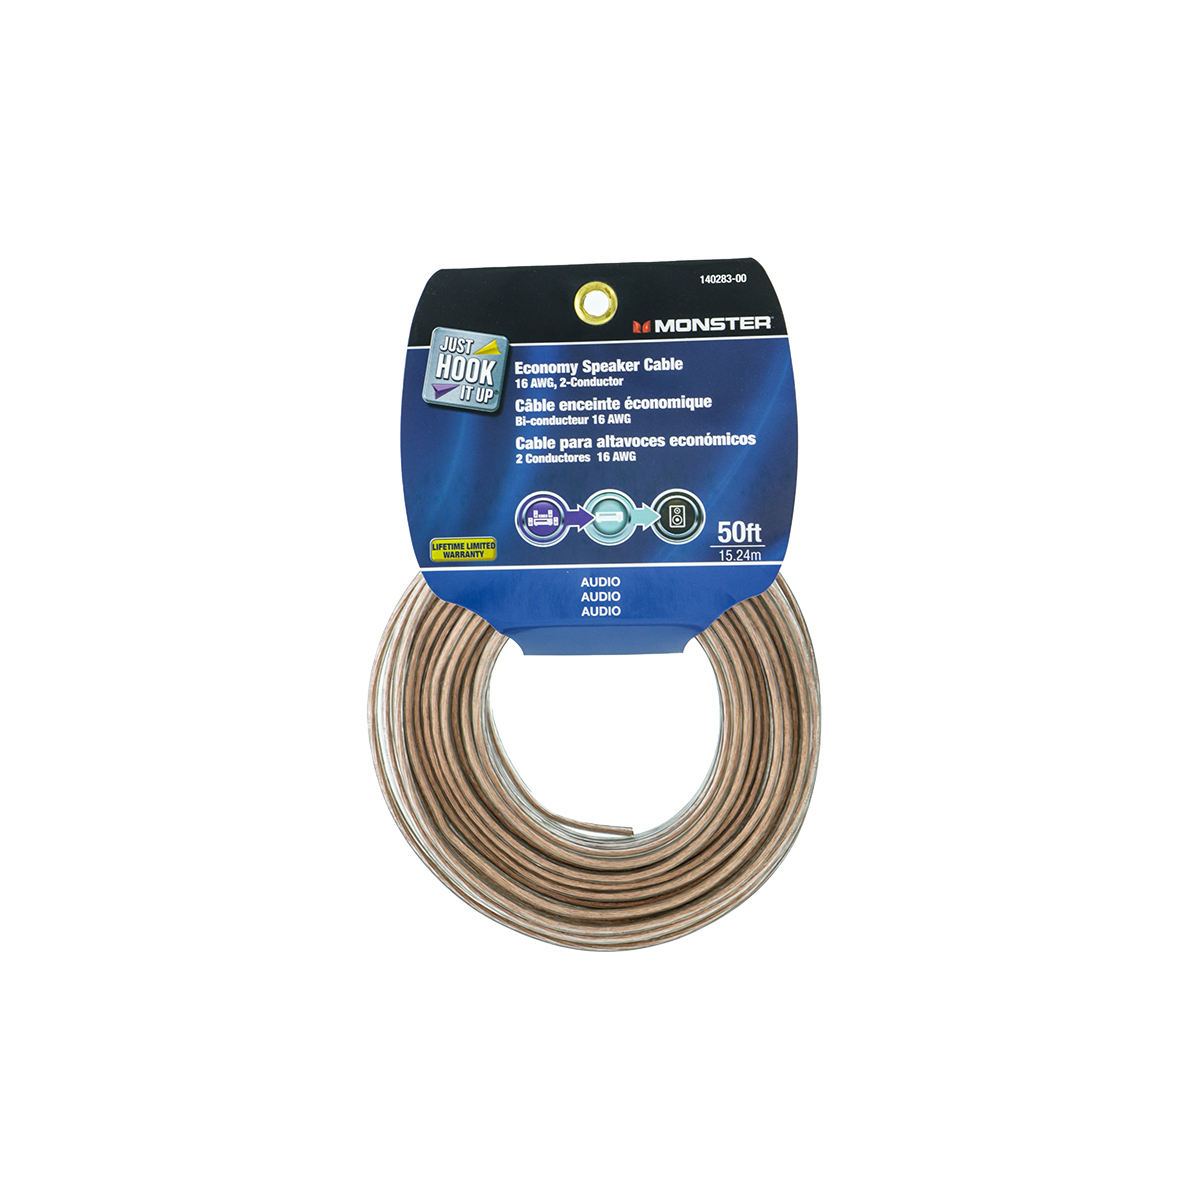 Cable para Altavoces 16AWG Monster 15.24m - 898532